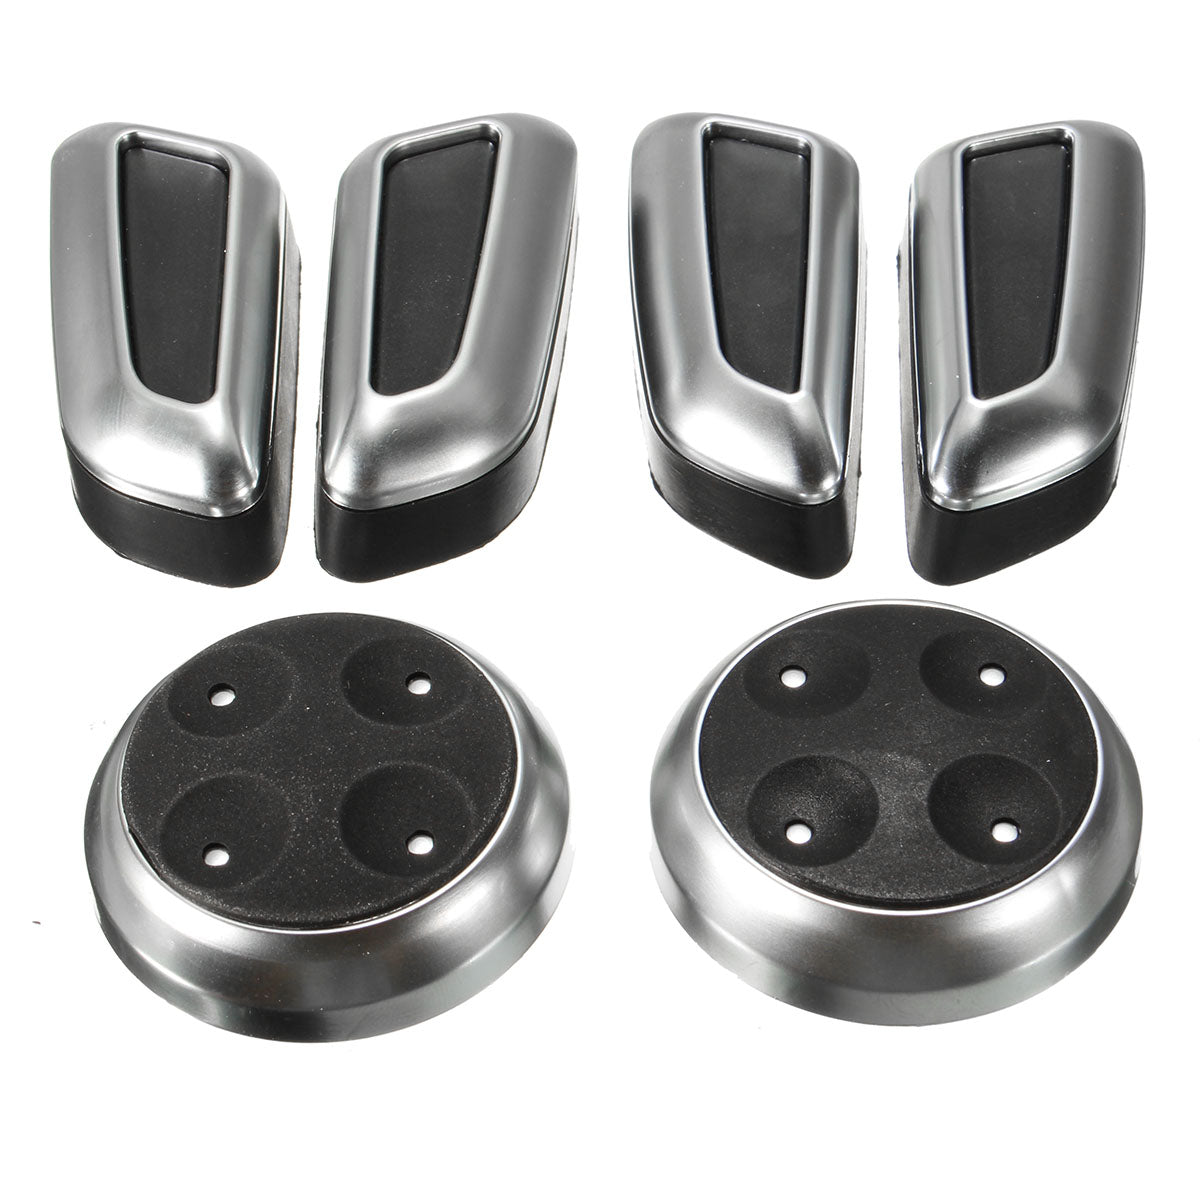 Dark Slate Gray Chrome Seat Adjustment Switch Cover Trims for Audi A3 A4 A5 A6 Q3 Q5 for VW Tiguan